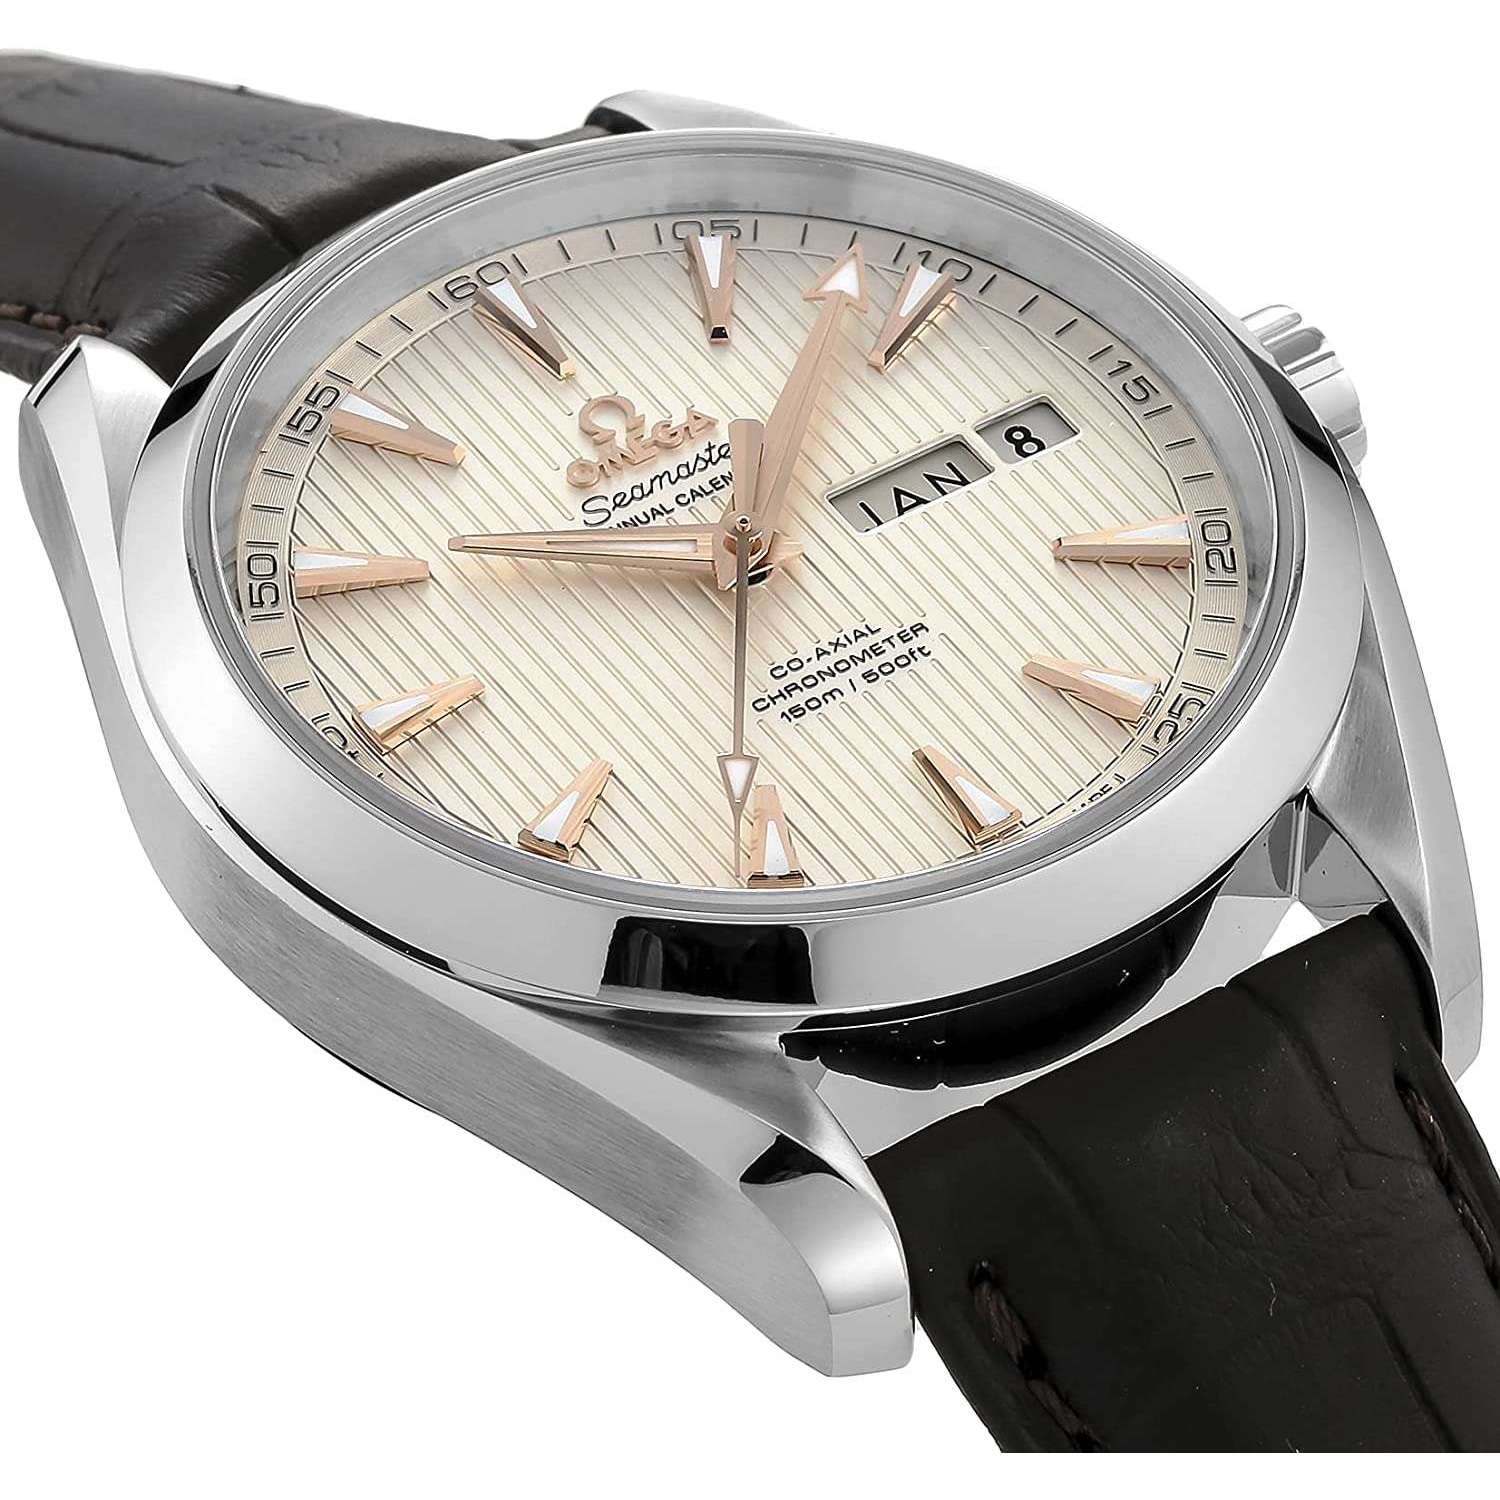 ROOK JAPAN:OMEGA SEAMASTER ANNUAL CALENDAR CO-AXIAL CHRONOMETER 43 MM MEN WATCH 231.13.43.22.02.003,Luxury Watch,Omega